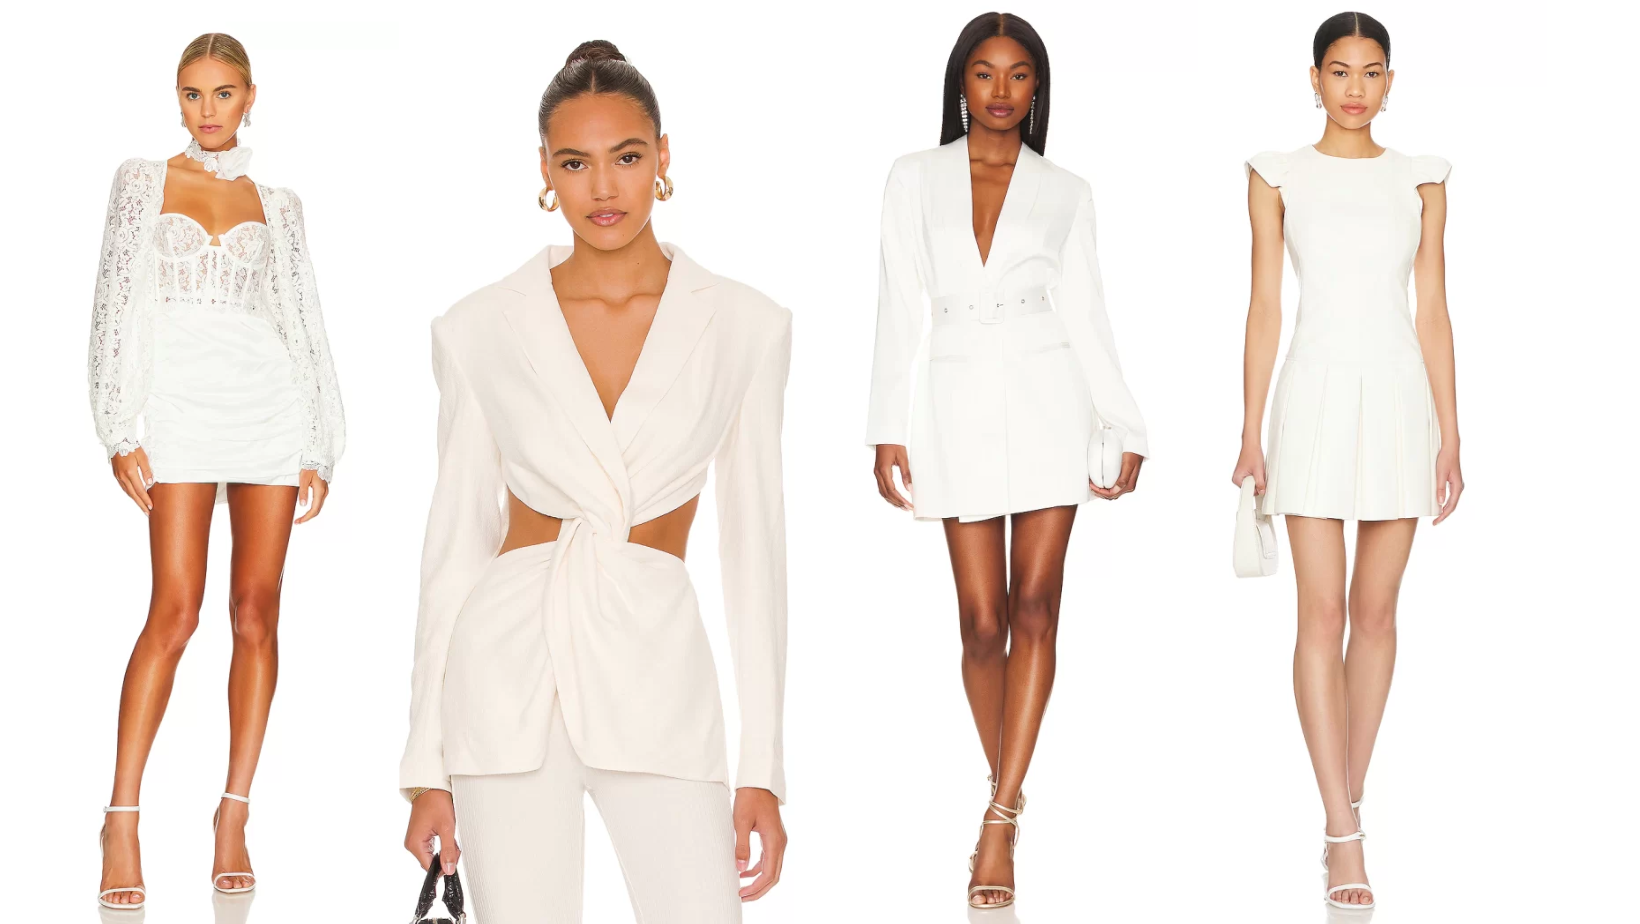 An All-White Look For a holiday night